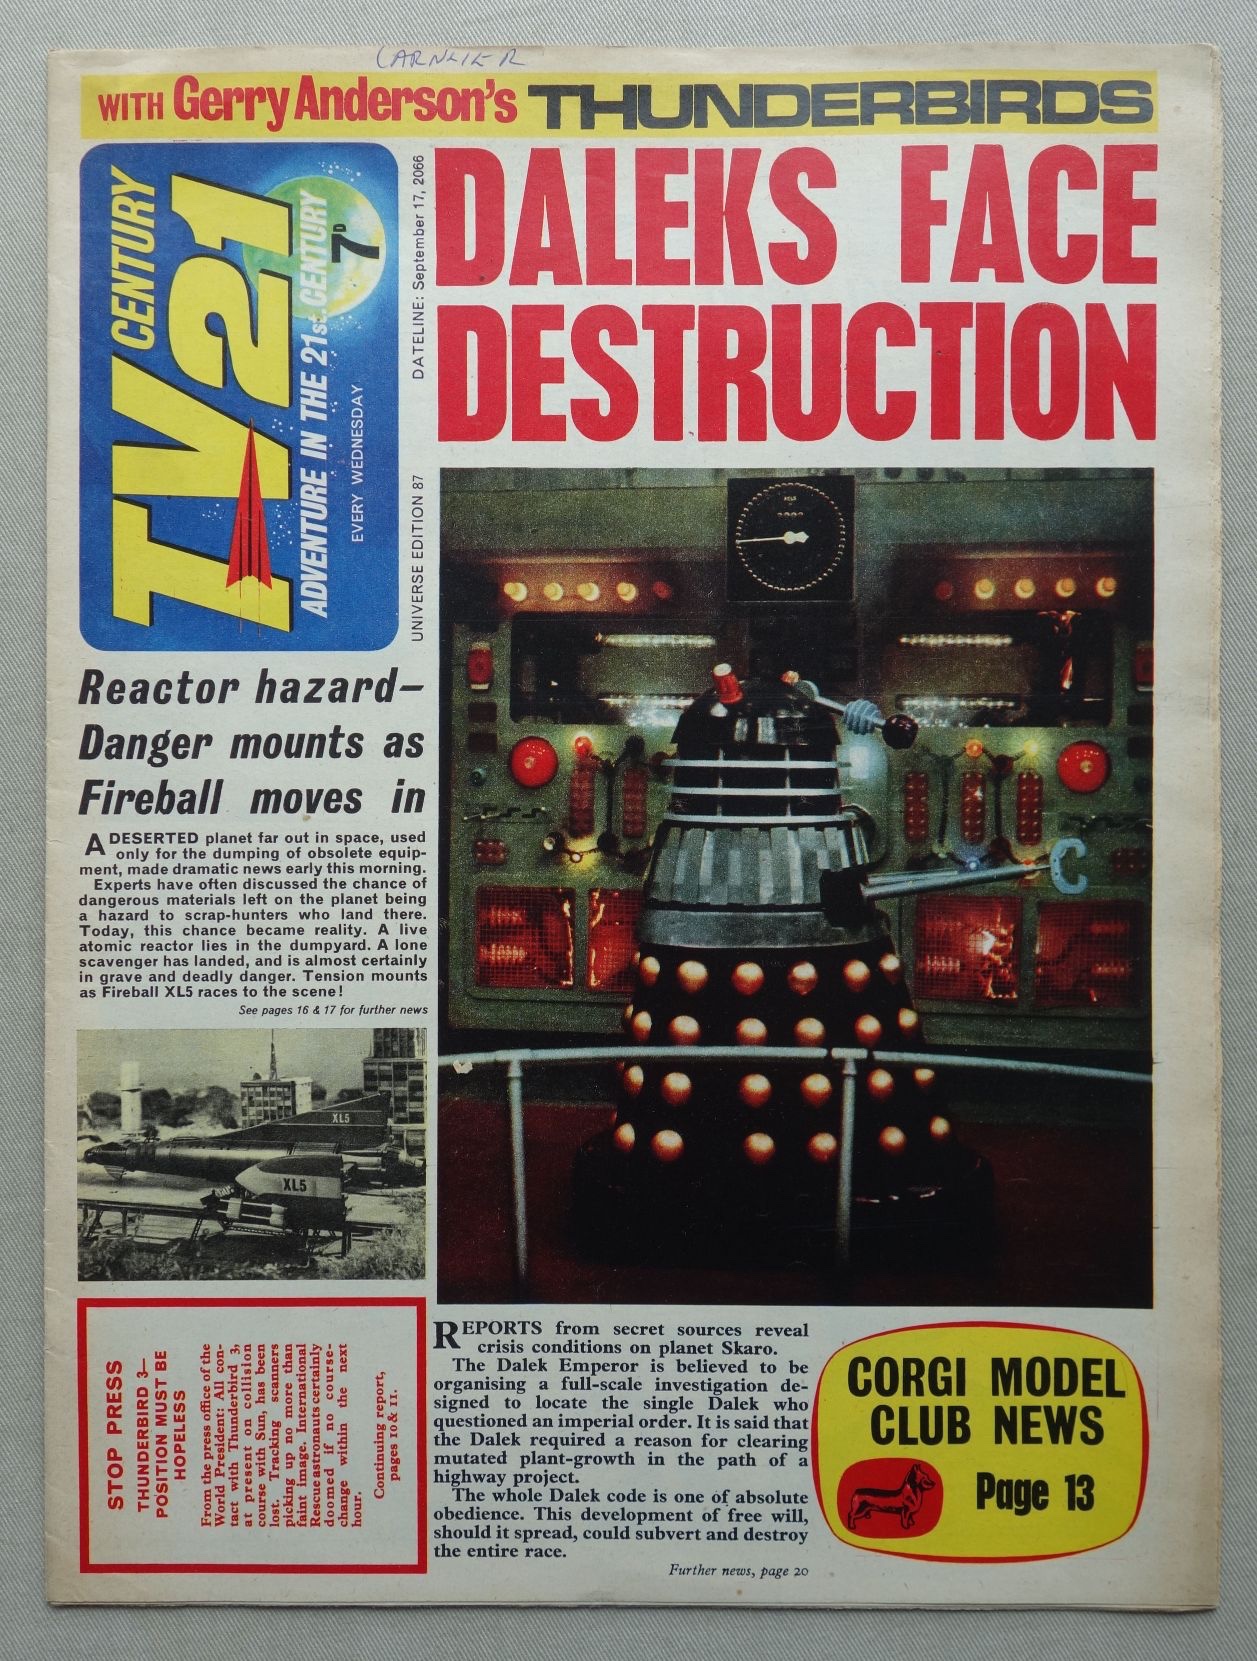 TV Century 21 No. 87 - cover dated 17th September 2066 (1966) with Dalek cover